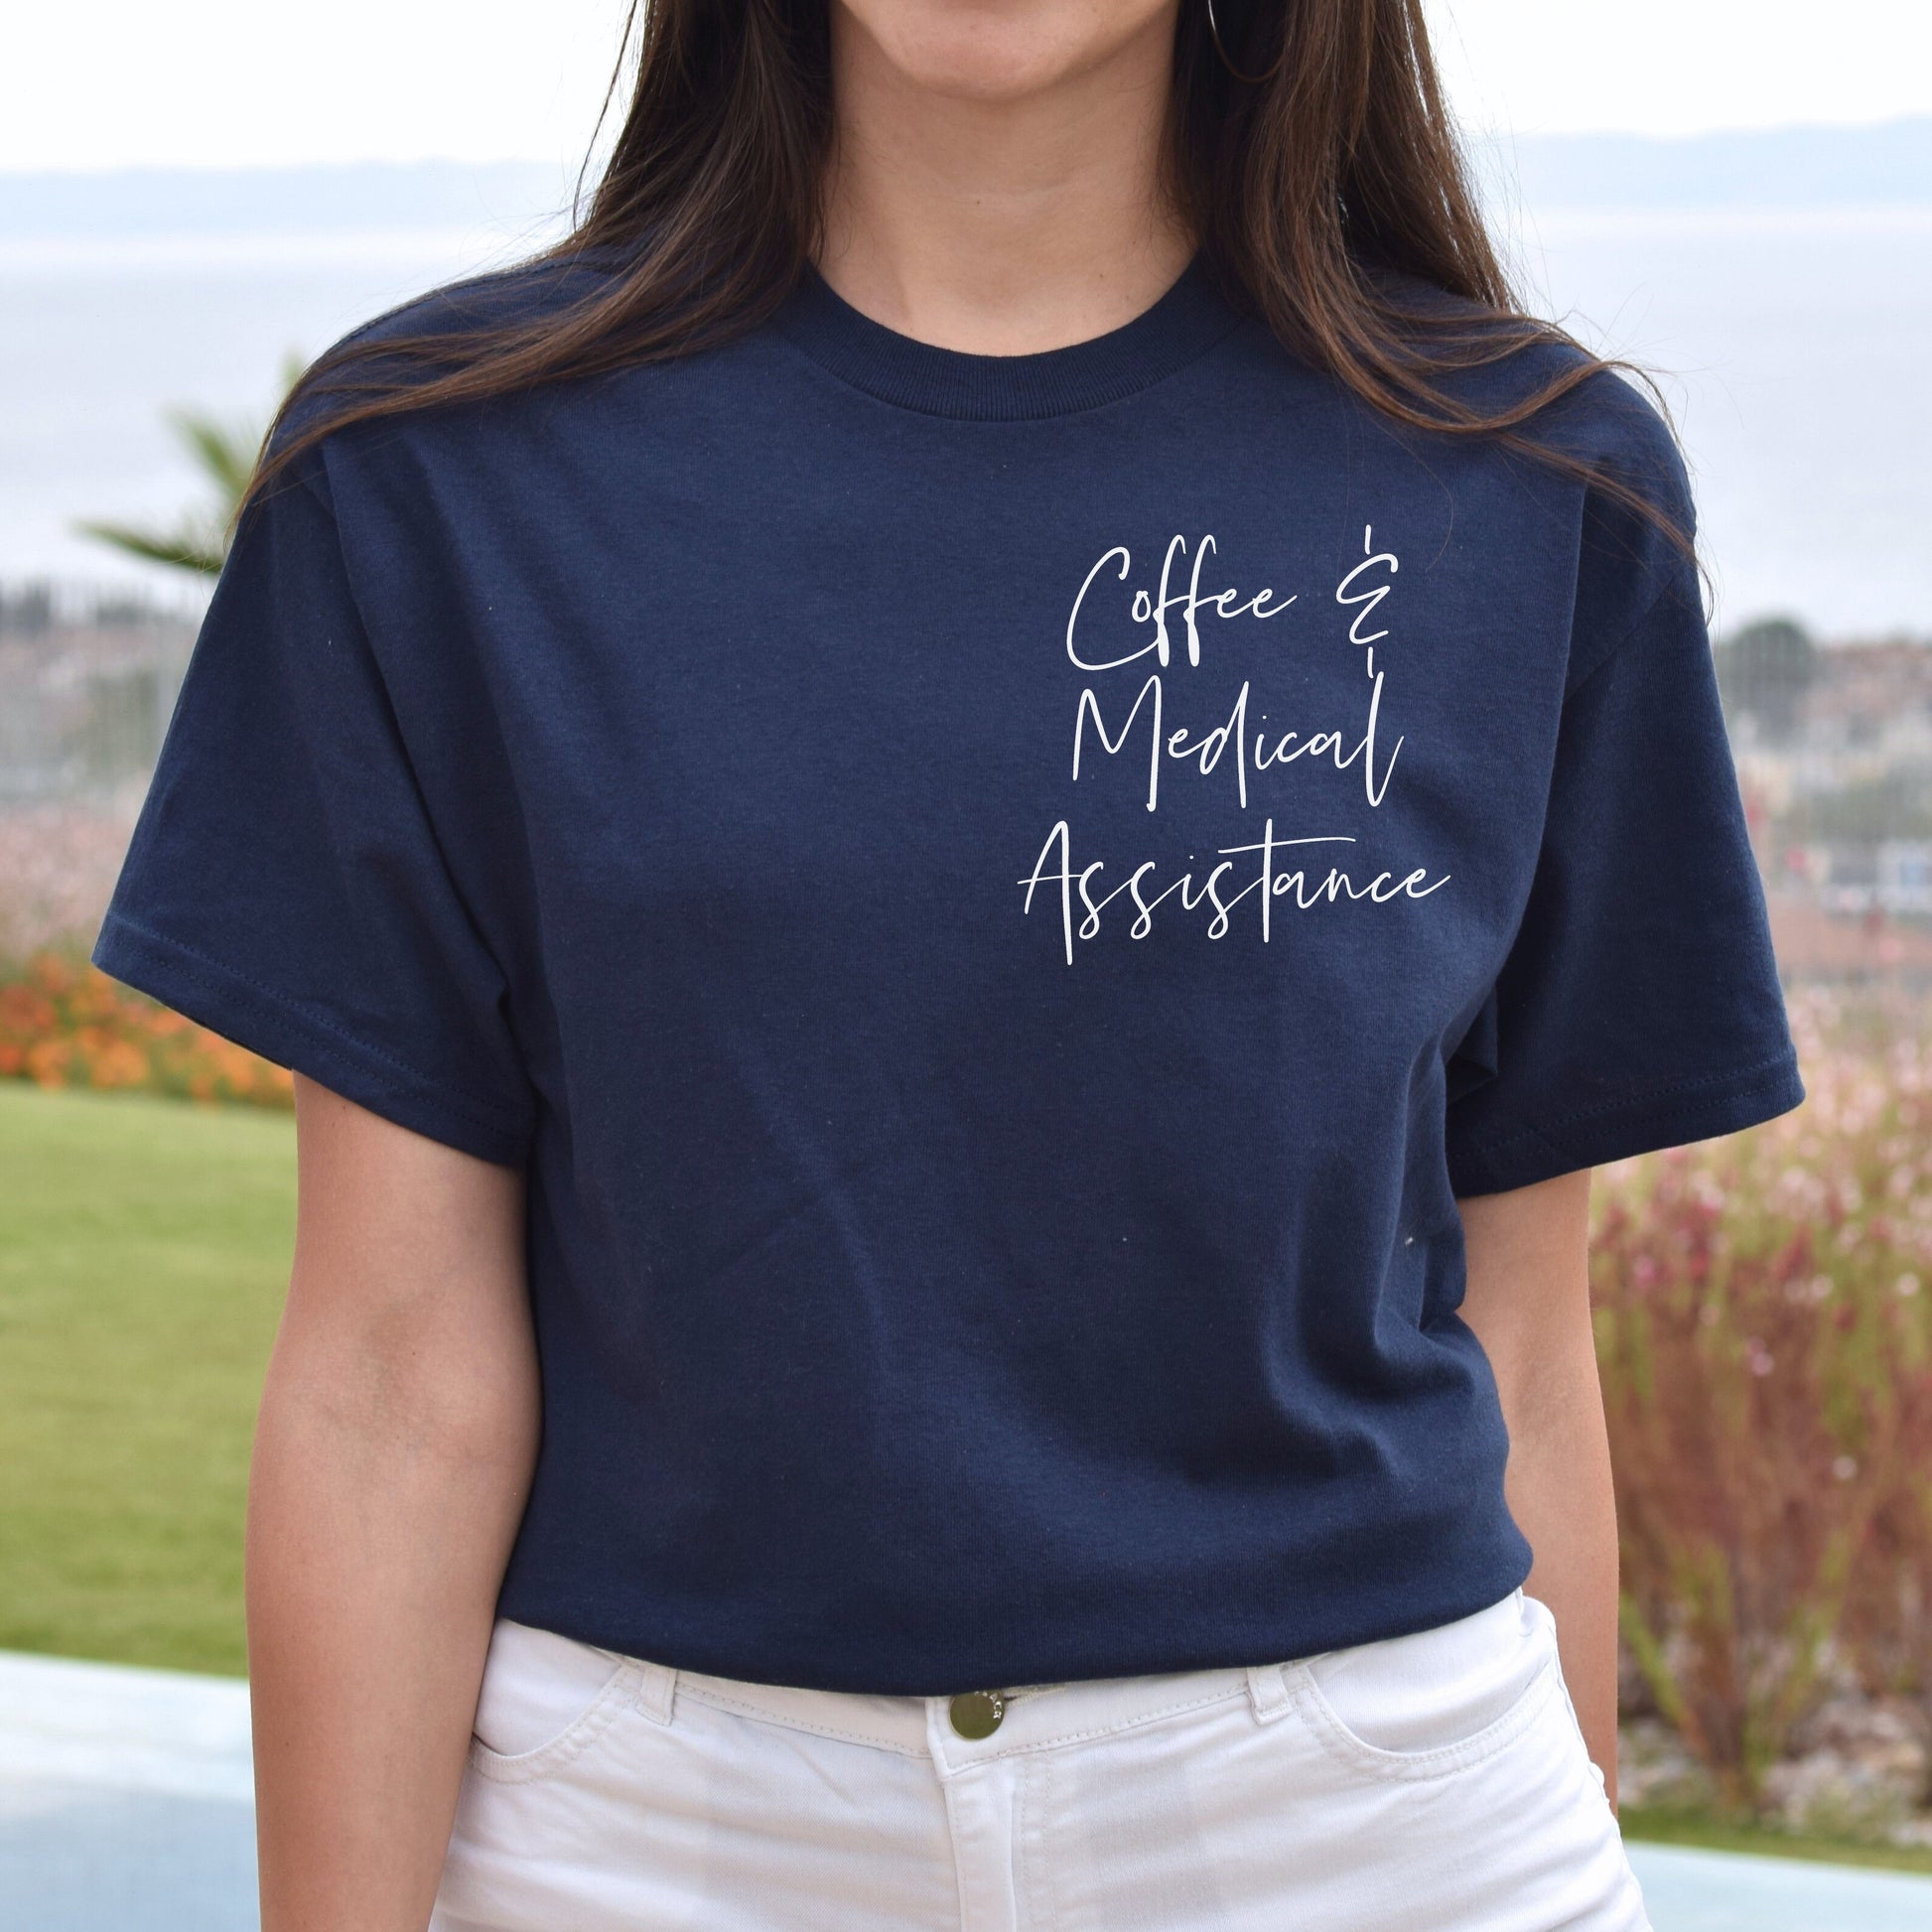 Coffee and medical assistance pocket Unisex T-shirt CMA tee Black Navy Dark Heather-Navy-Family-Gift-Planet